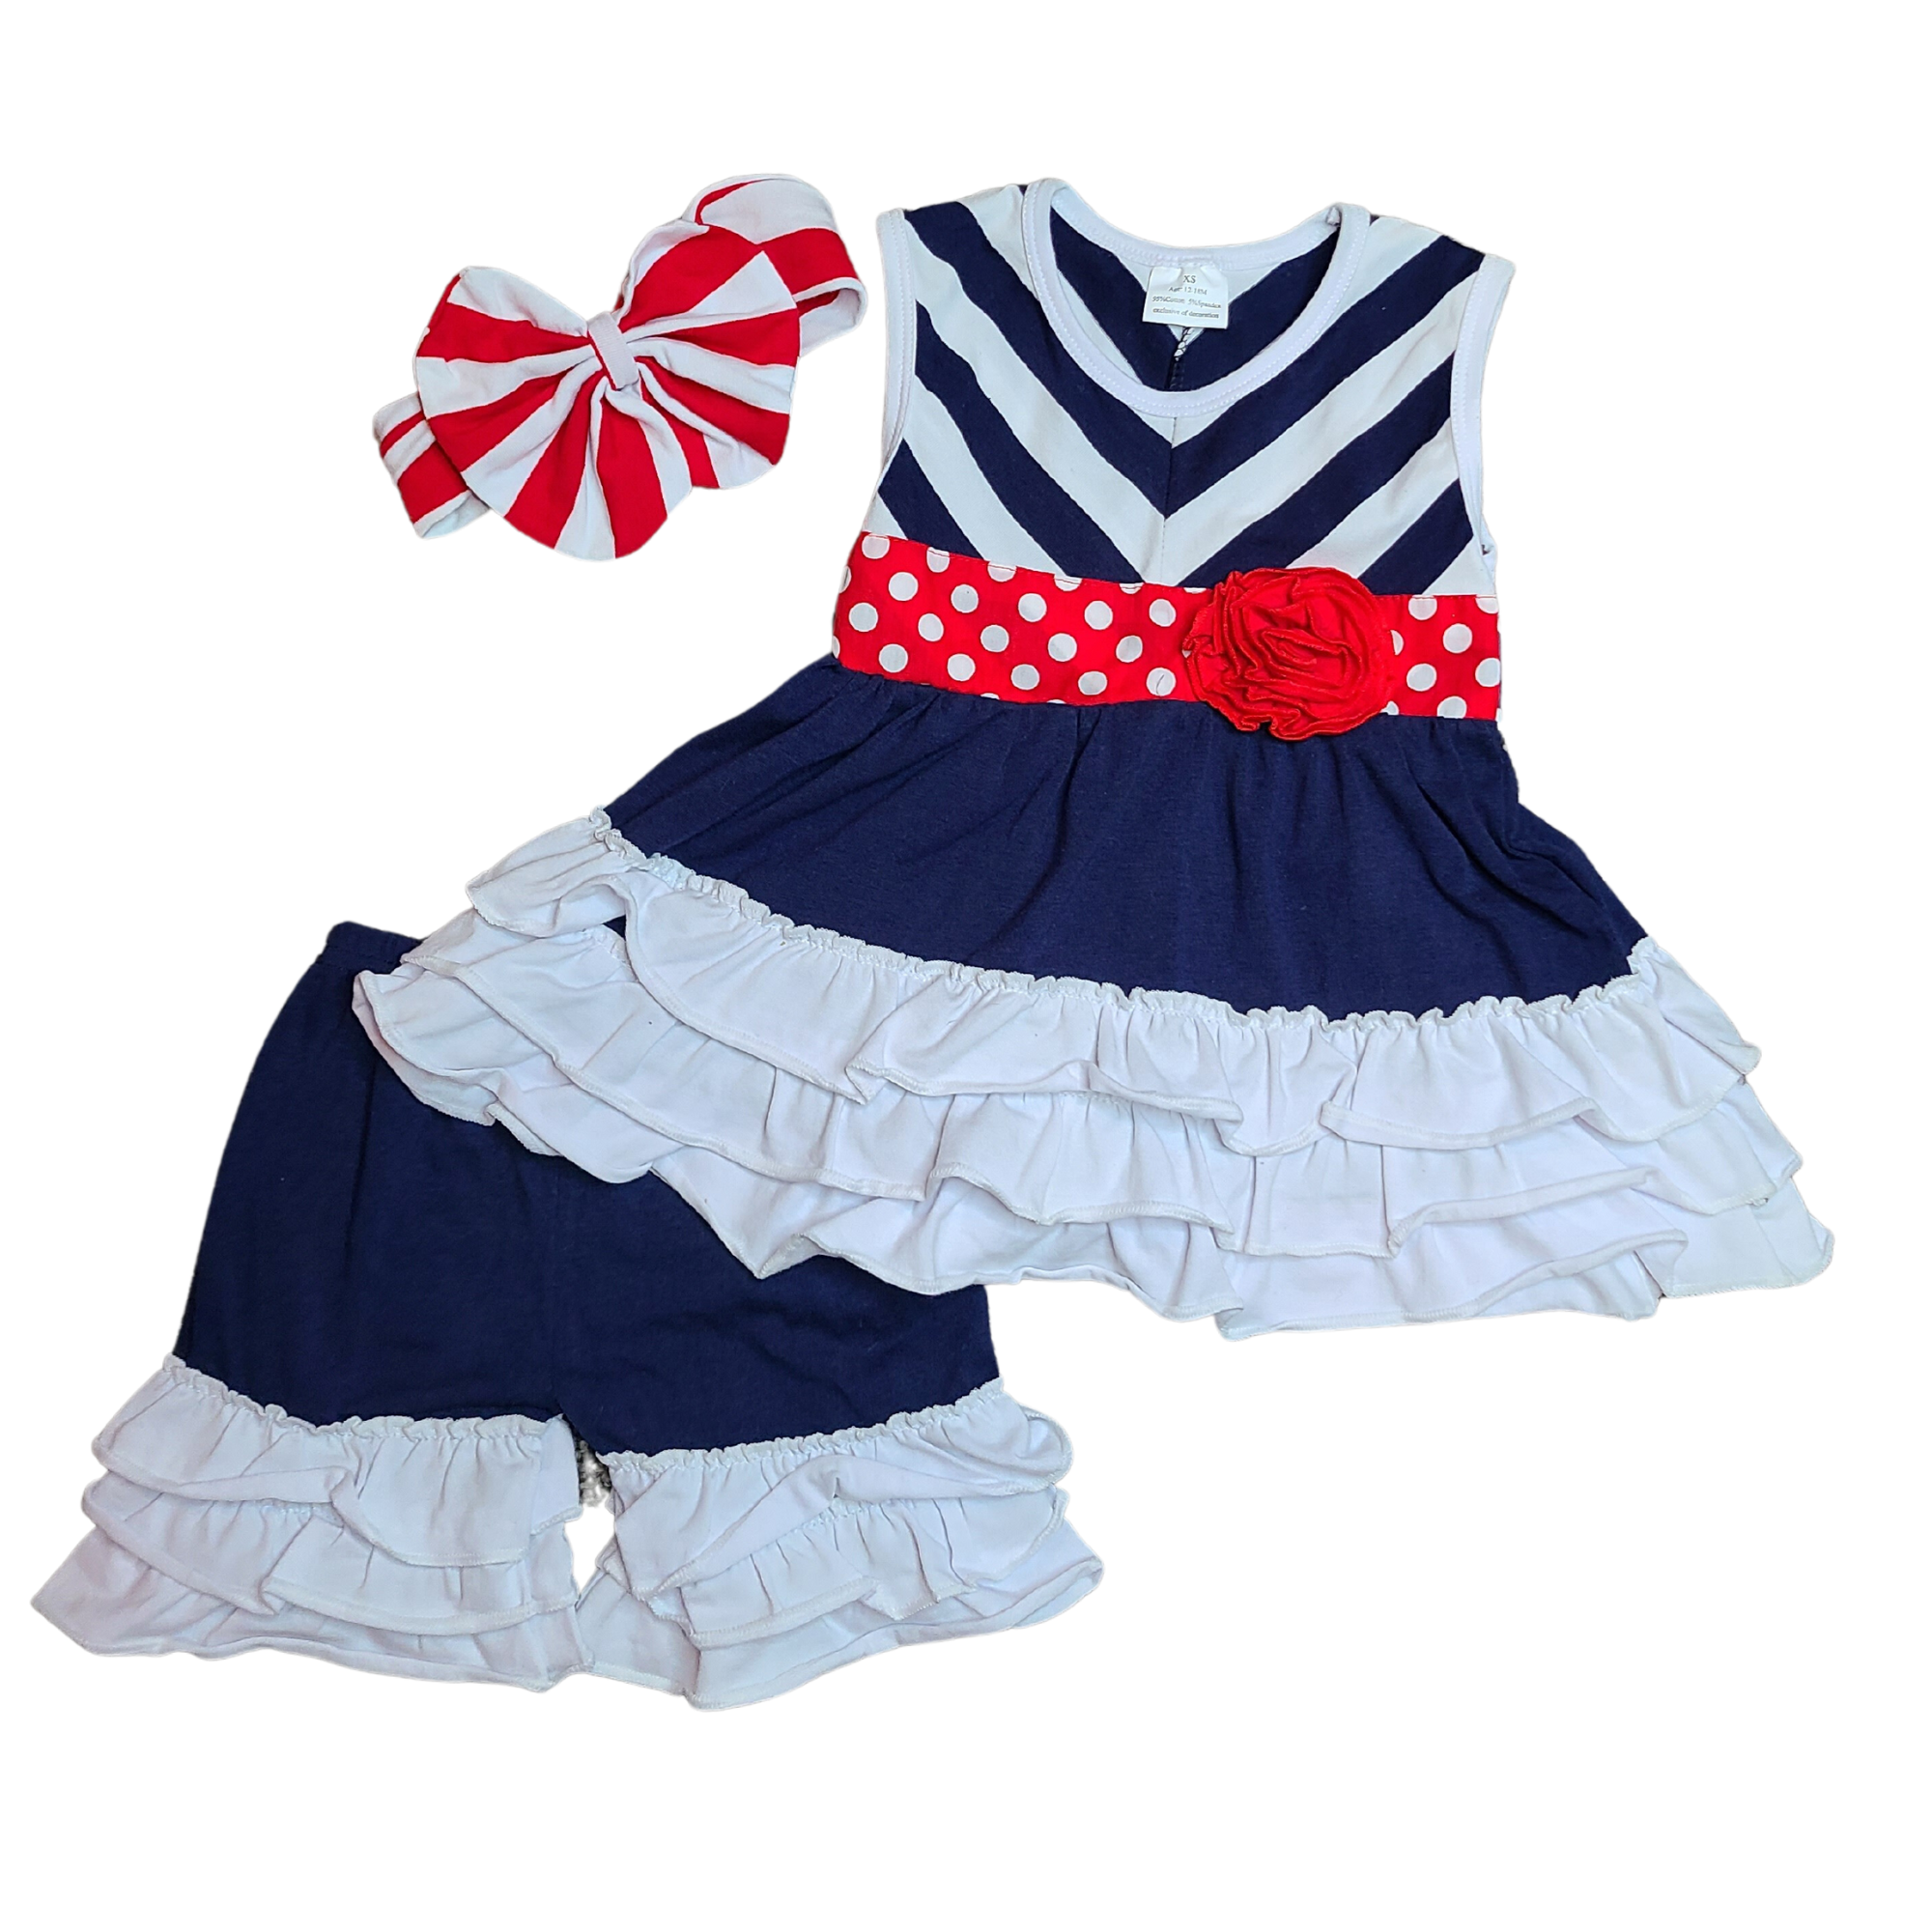 Red White and Navy Stripes 3 pc